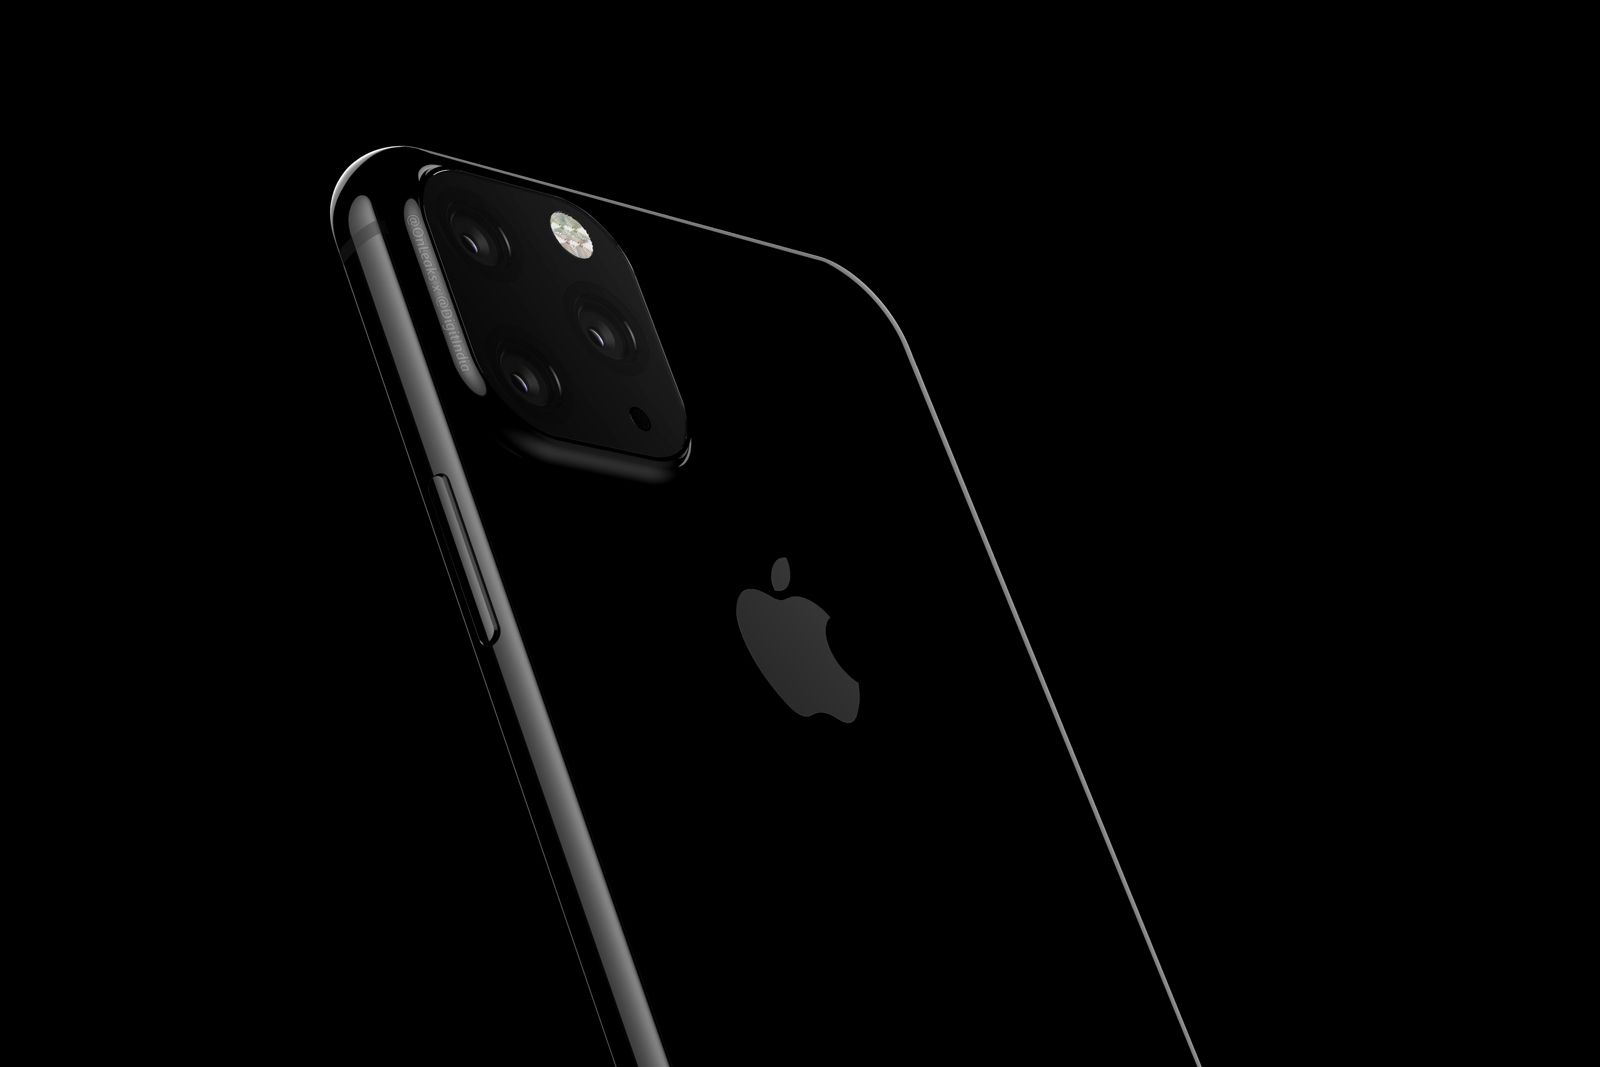 Apple iPhone XI might have the ugliest triple camera solution so far image 1